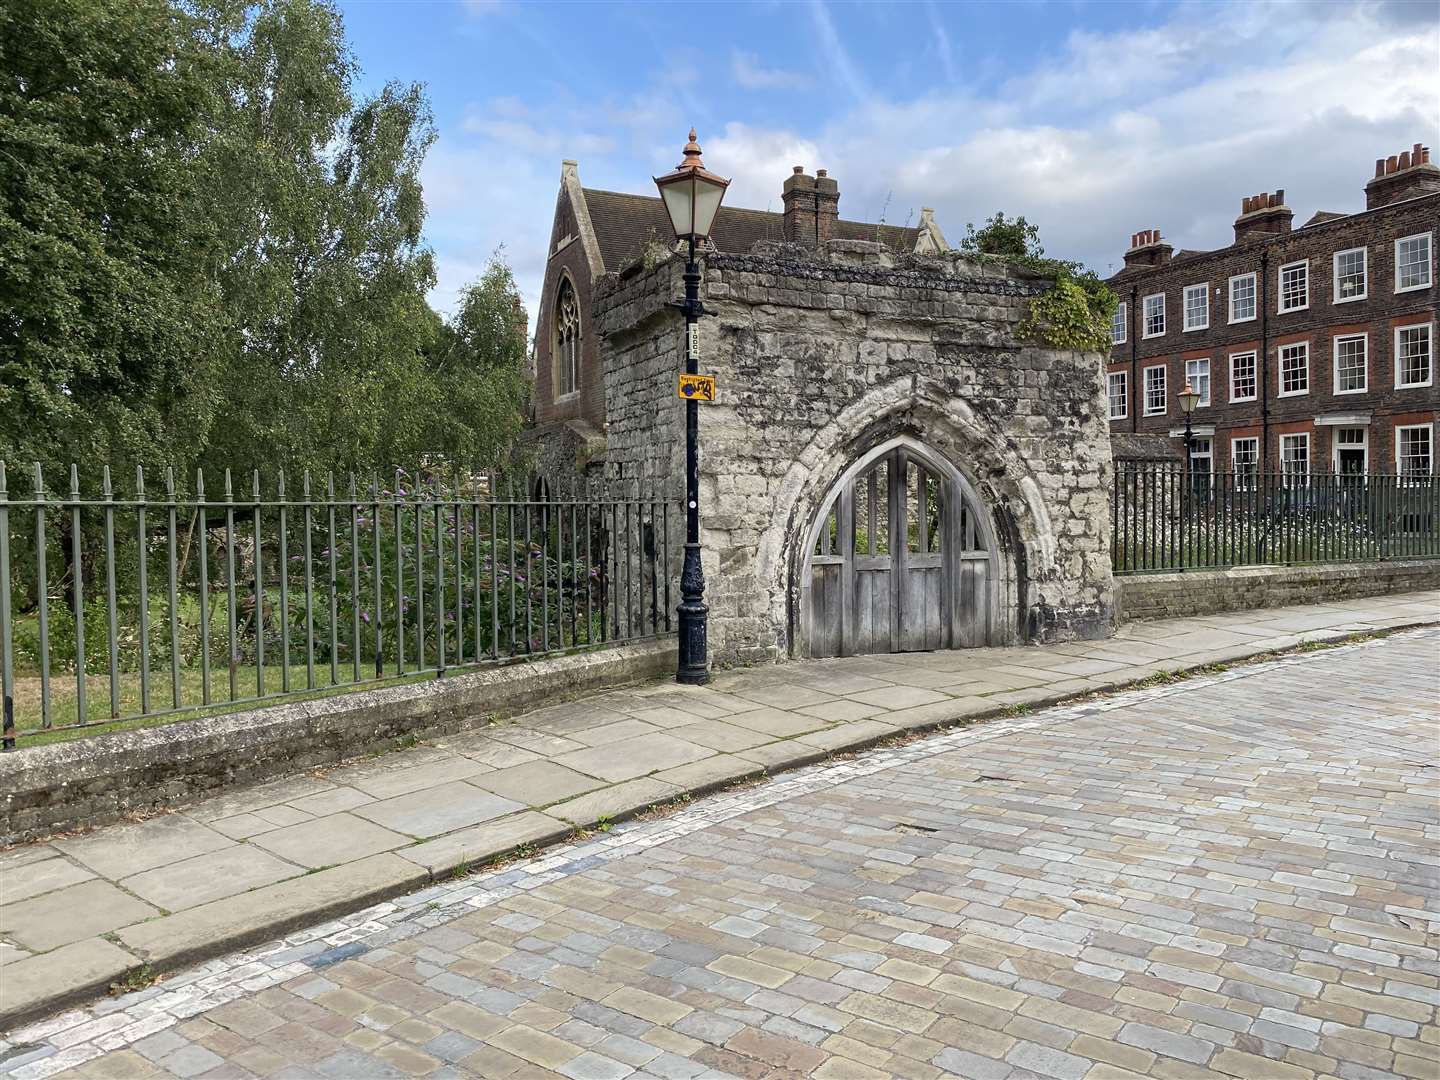 The Bishop's Gate at Rochester Cathedral, which is thought to be about 900 years old, will be restored after a fundraising campaign hit its £50,000 target